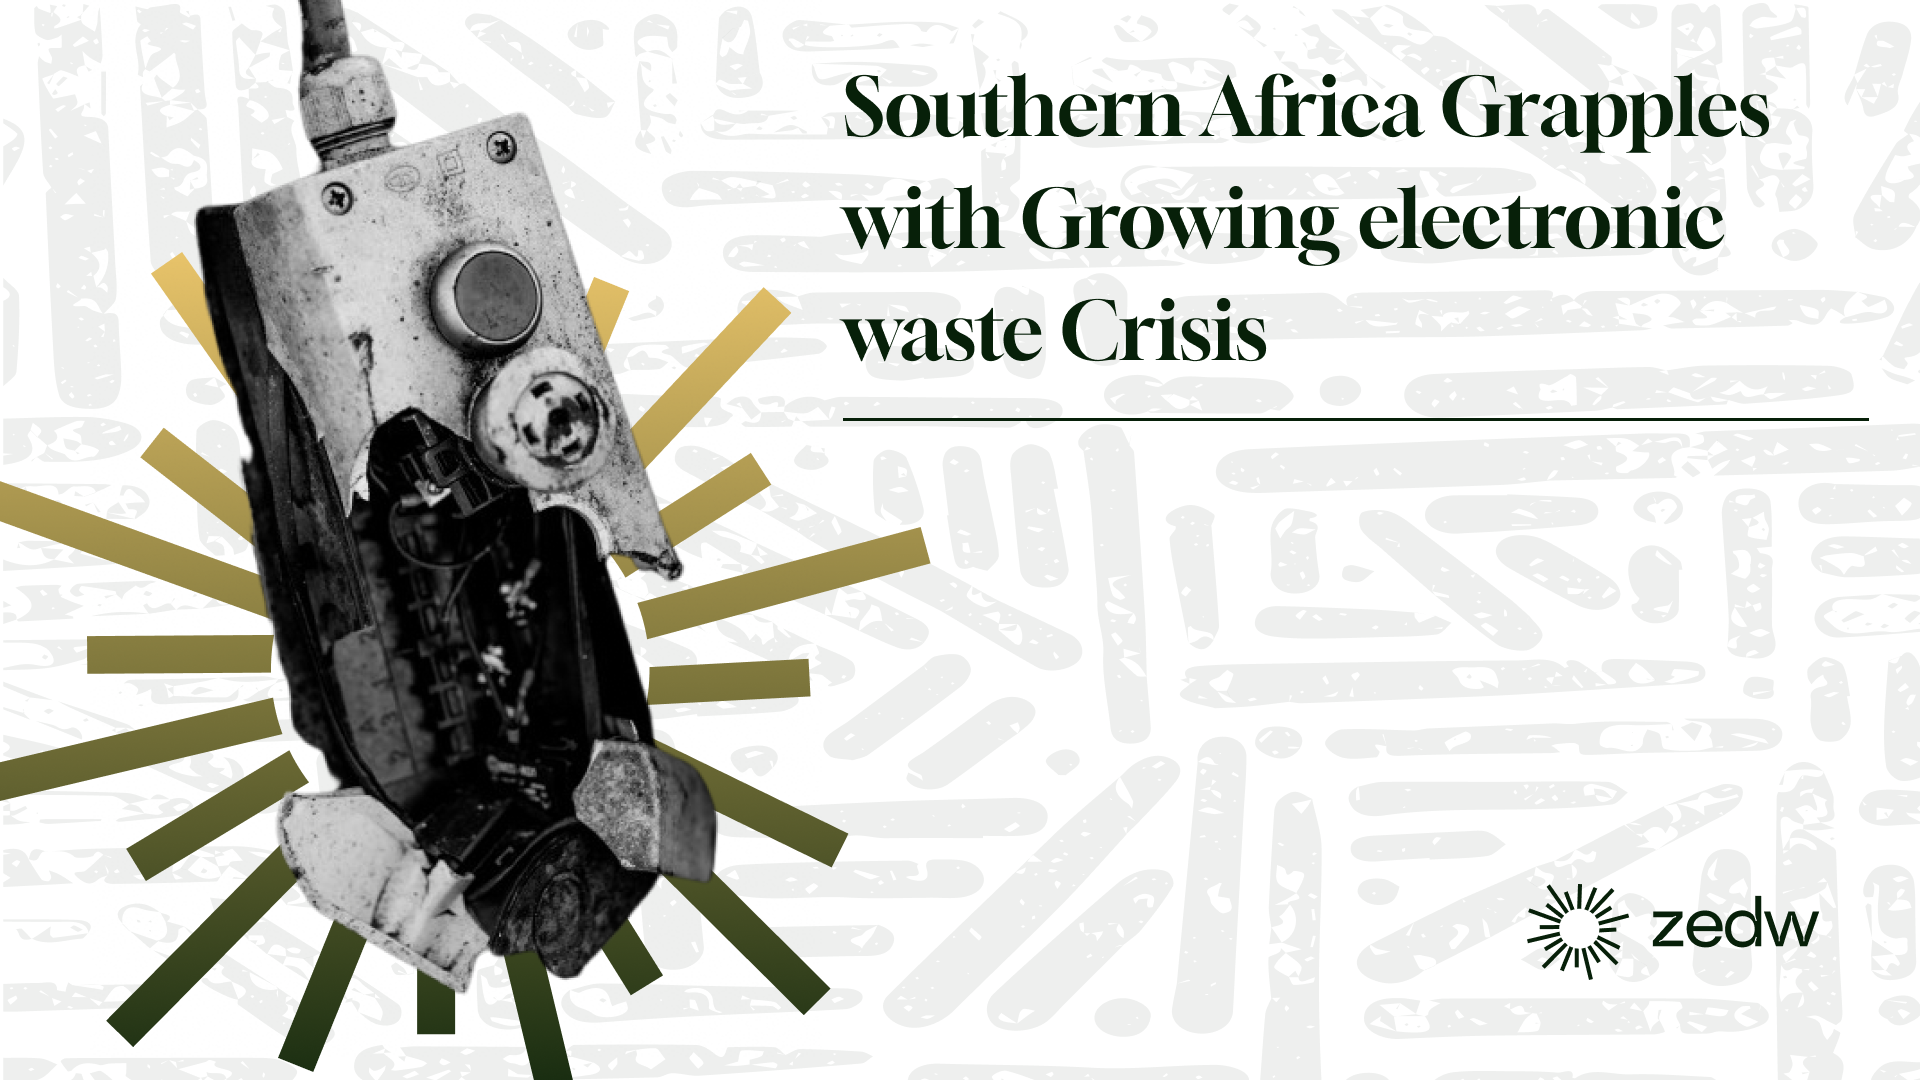 The Challenge and Opportunity of eWaste Management in Southern Africa